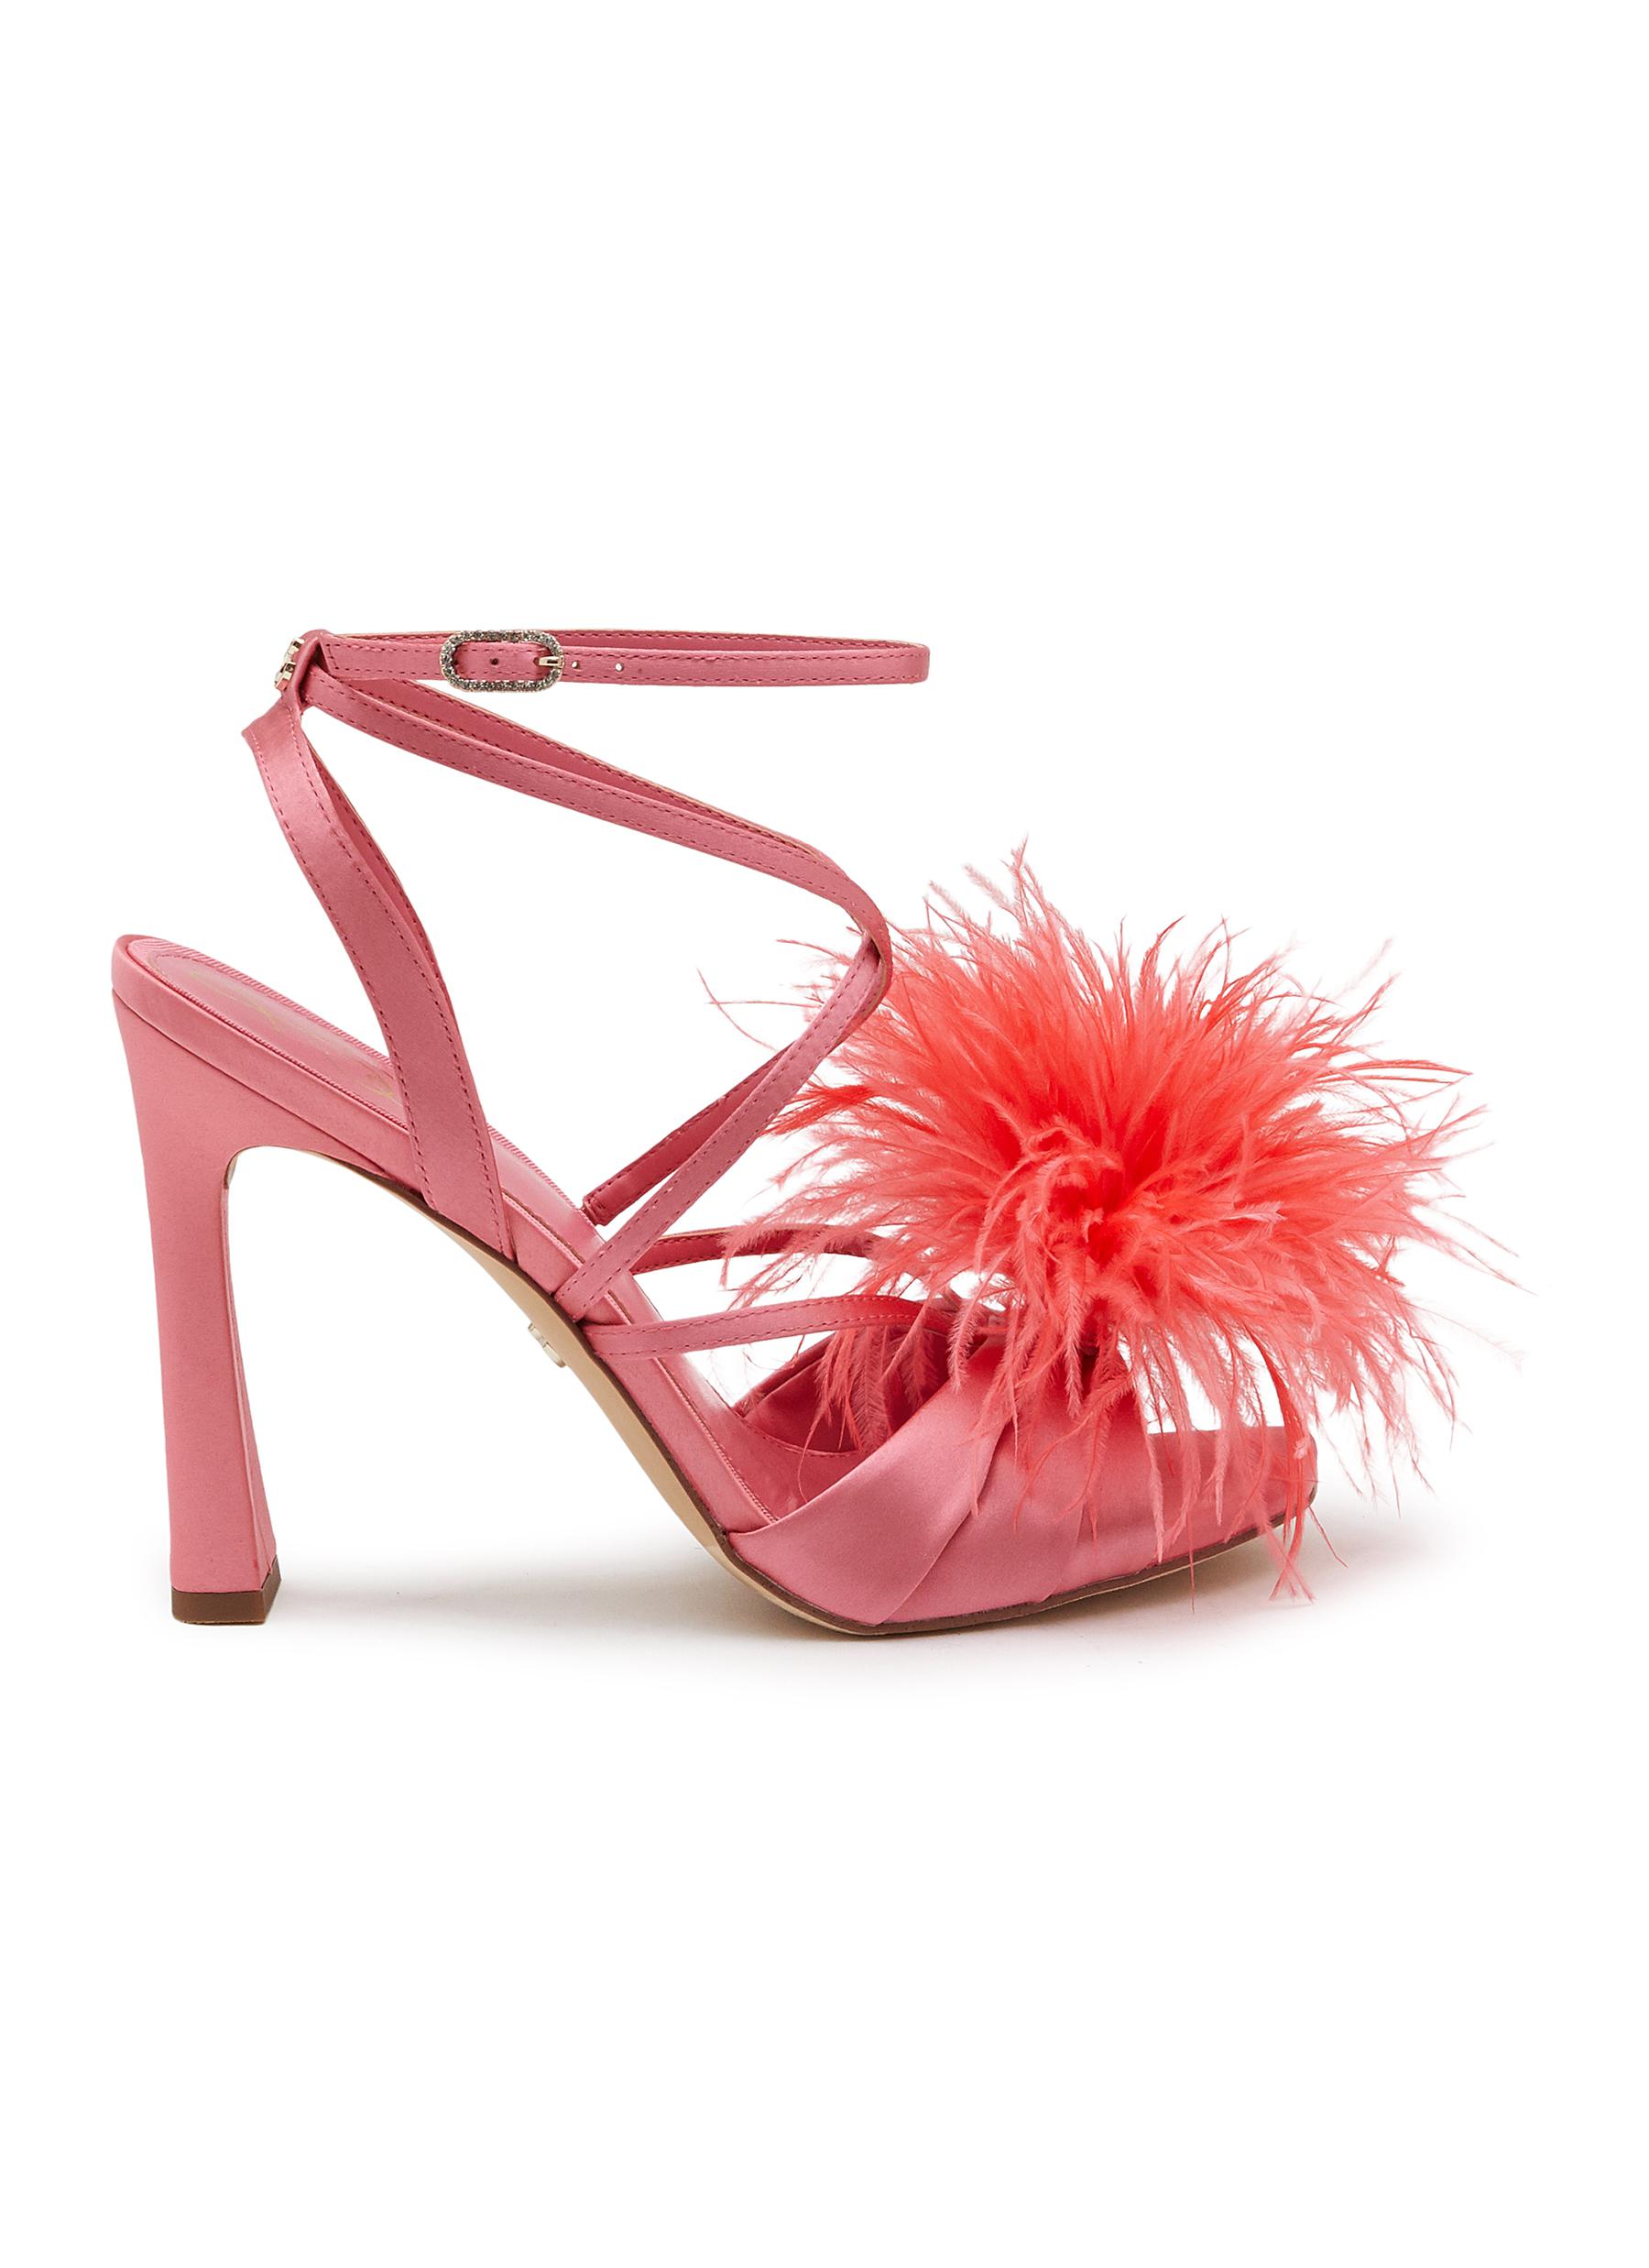 Womens Feather Fur Ankle Strap Sandals Pointed Toe High Heels Shoes Party  Runway | eBay